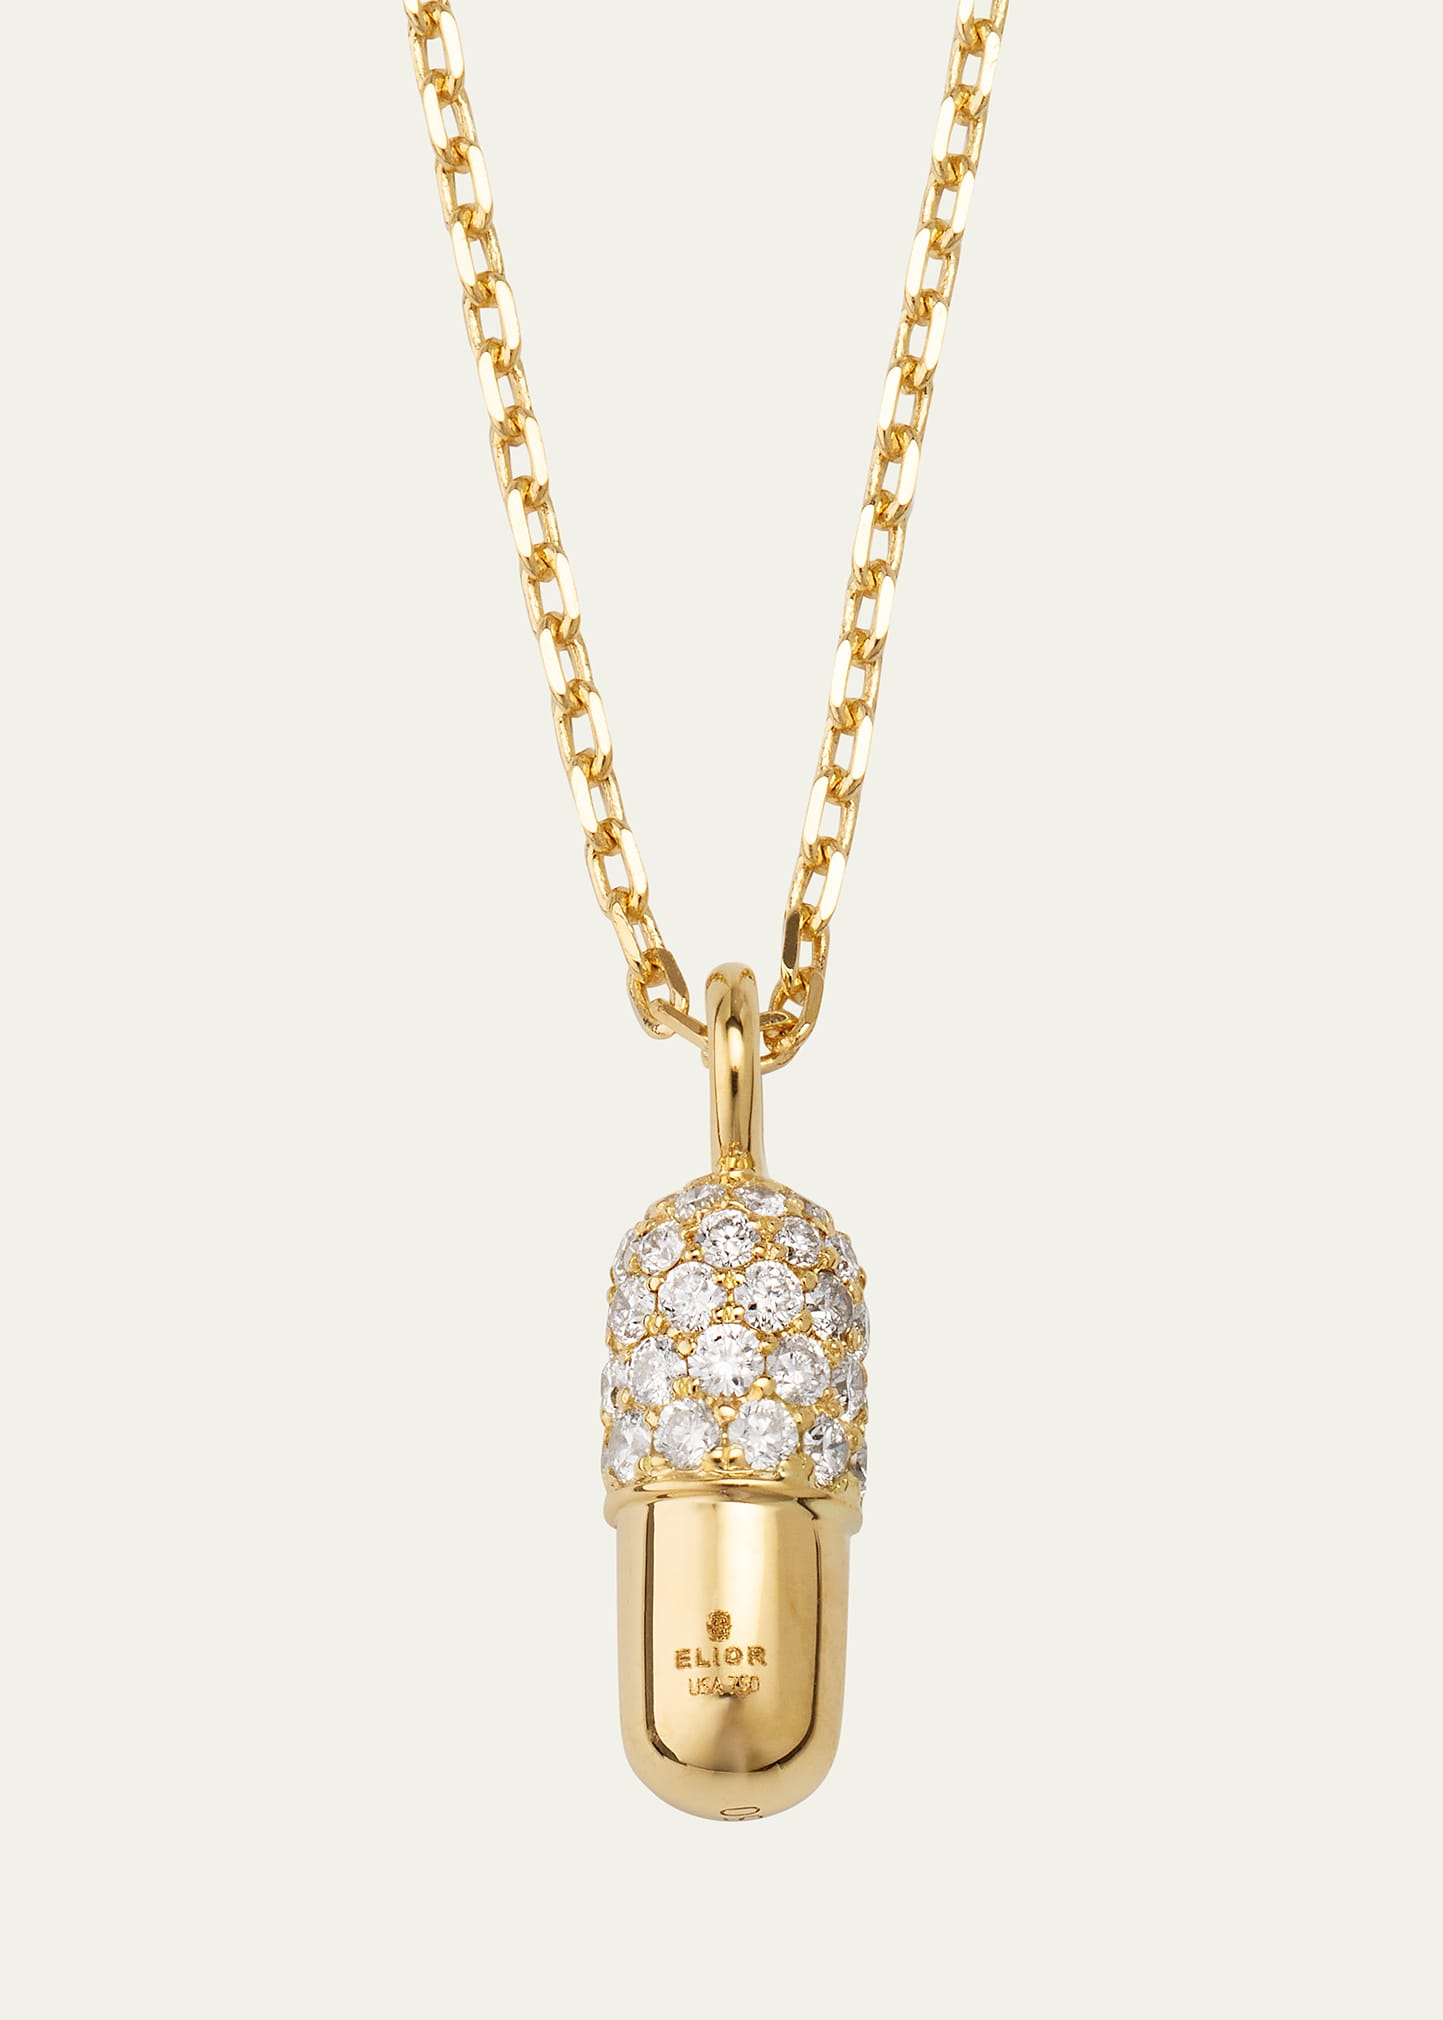 Elior 18k Yellow Gold Small Diamond Pill Pendant Necklace In Yg